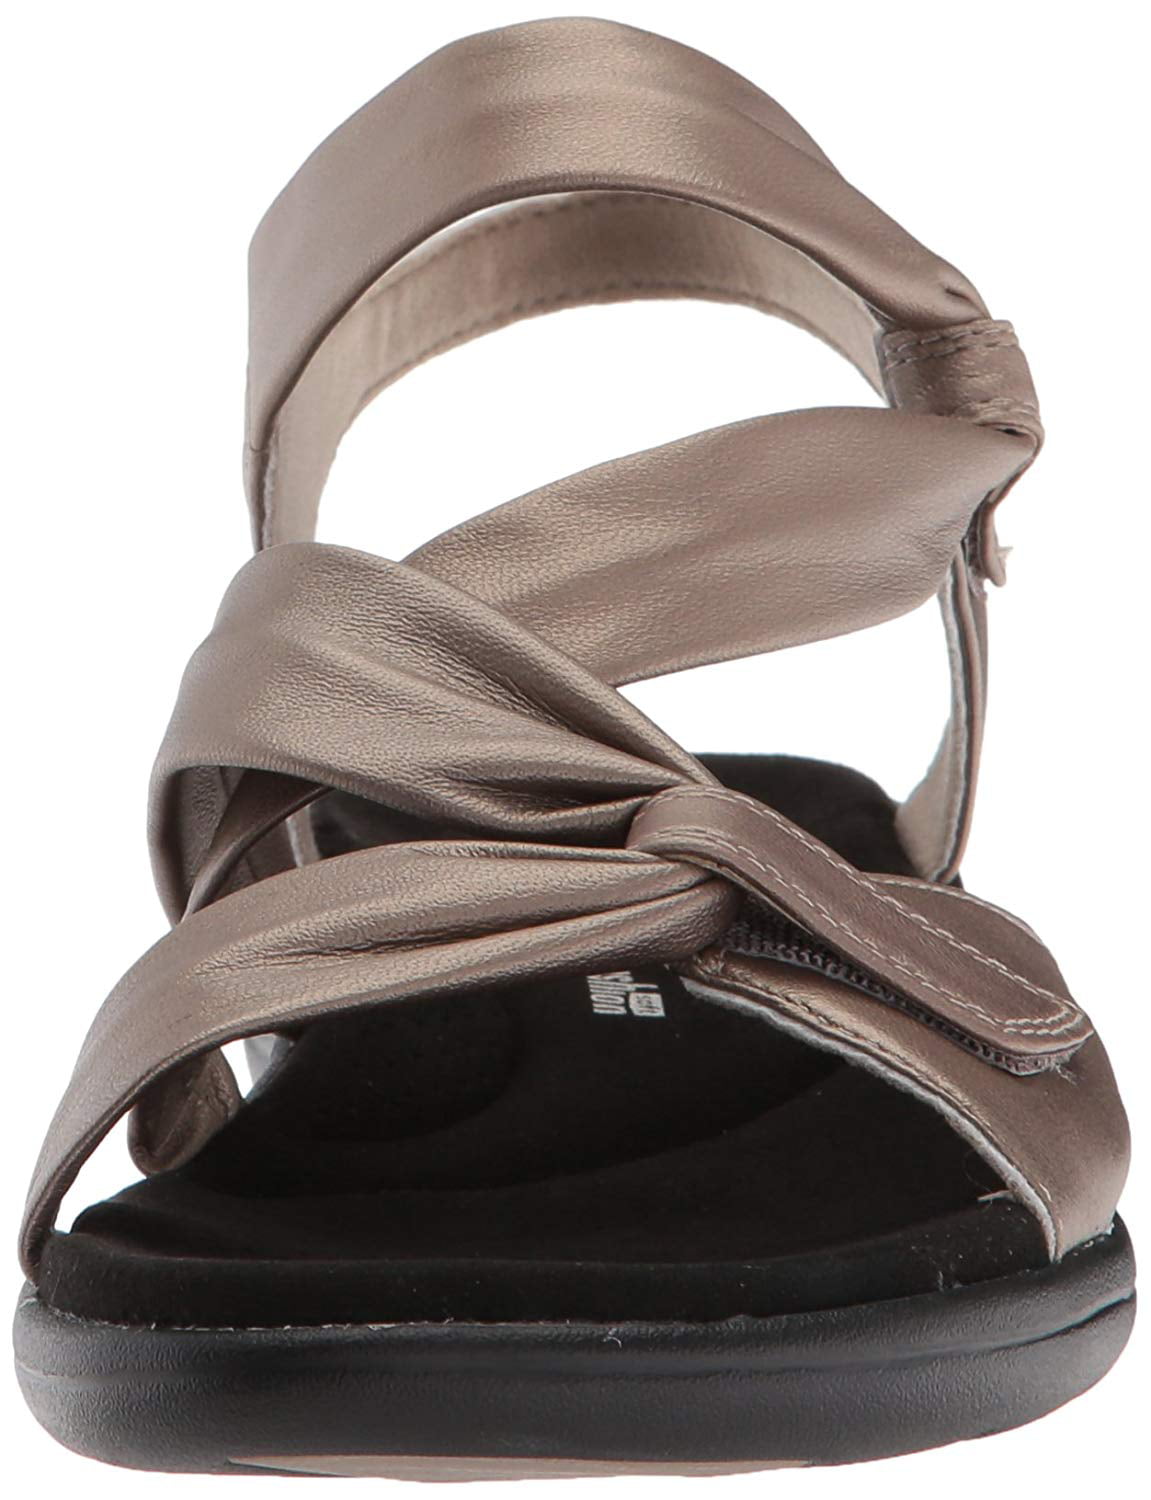 saylie moon sports leather sandals